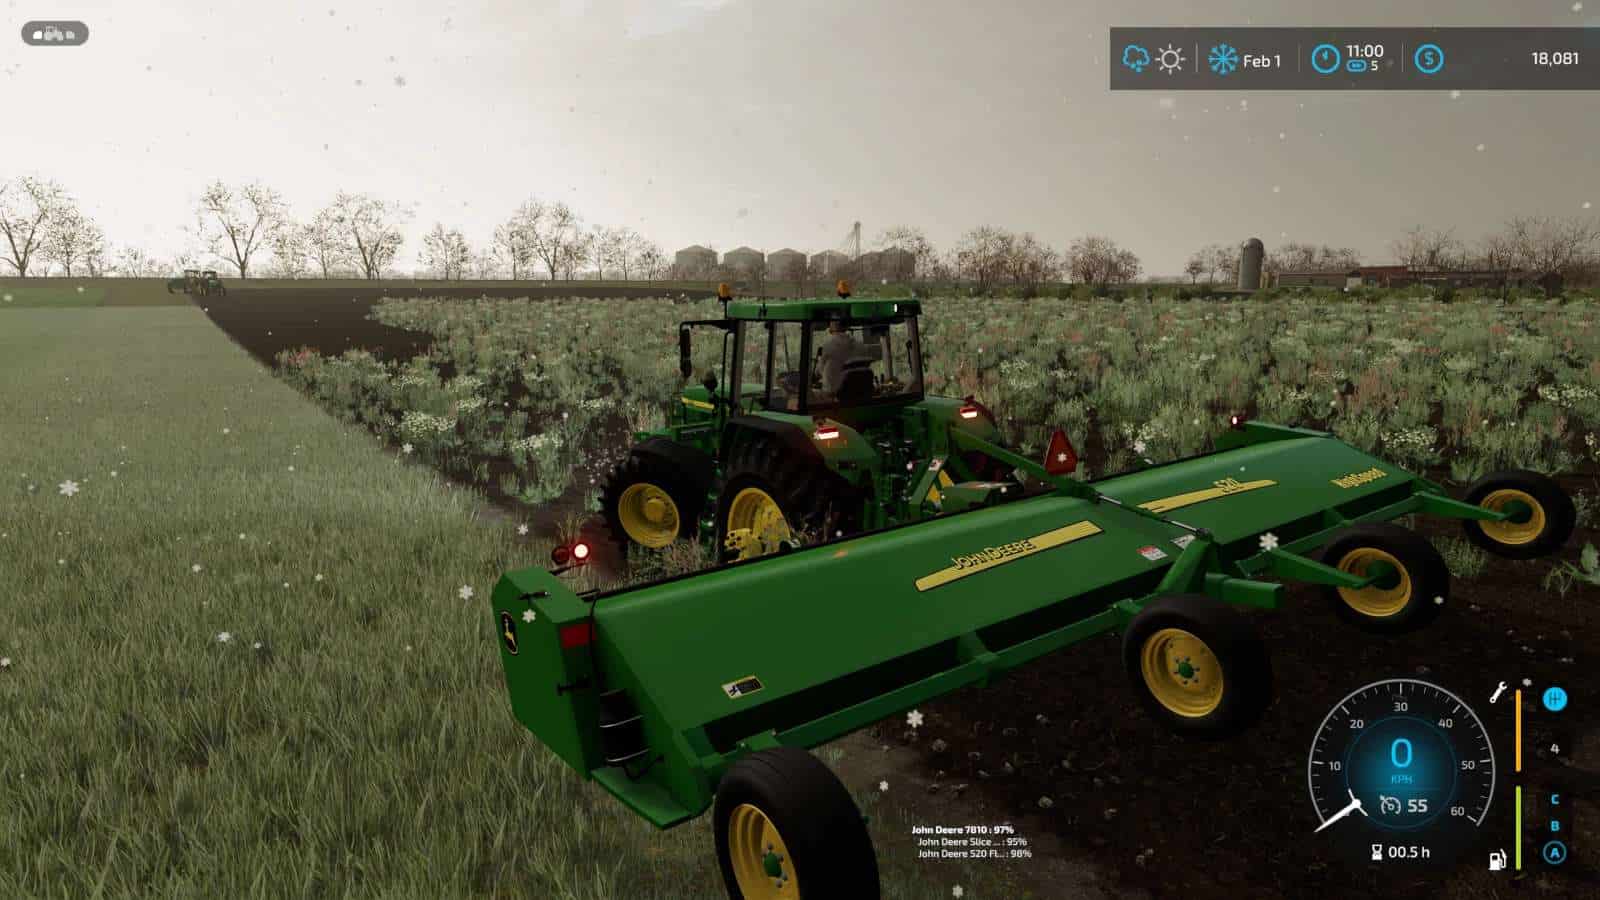 Fs22 John Deere 520 Flail Mower V1000 Fs 22 Implements And Tools Mod Download 4952